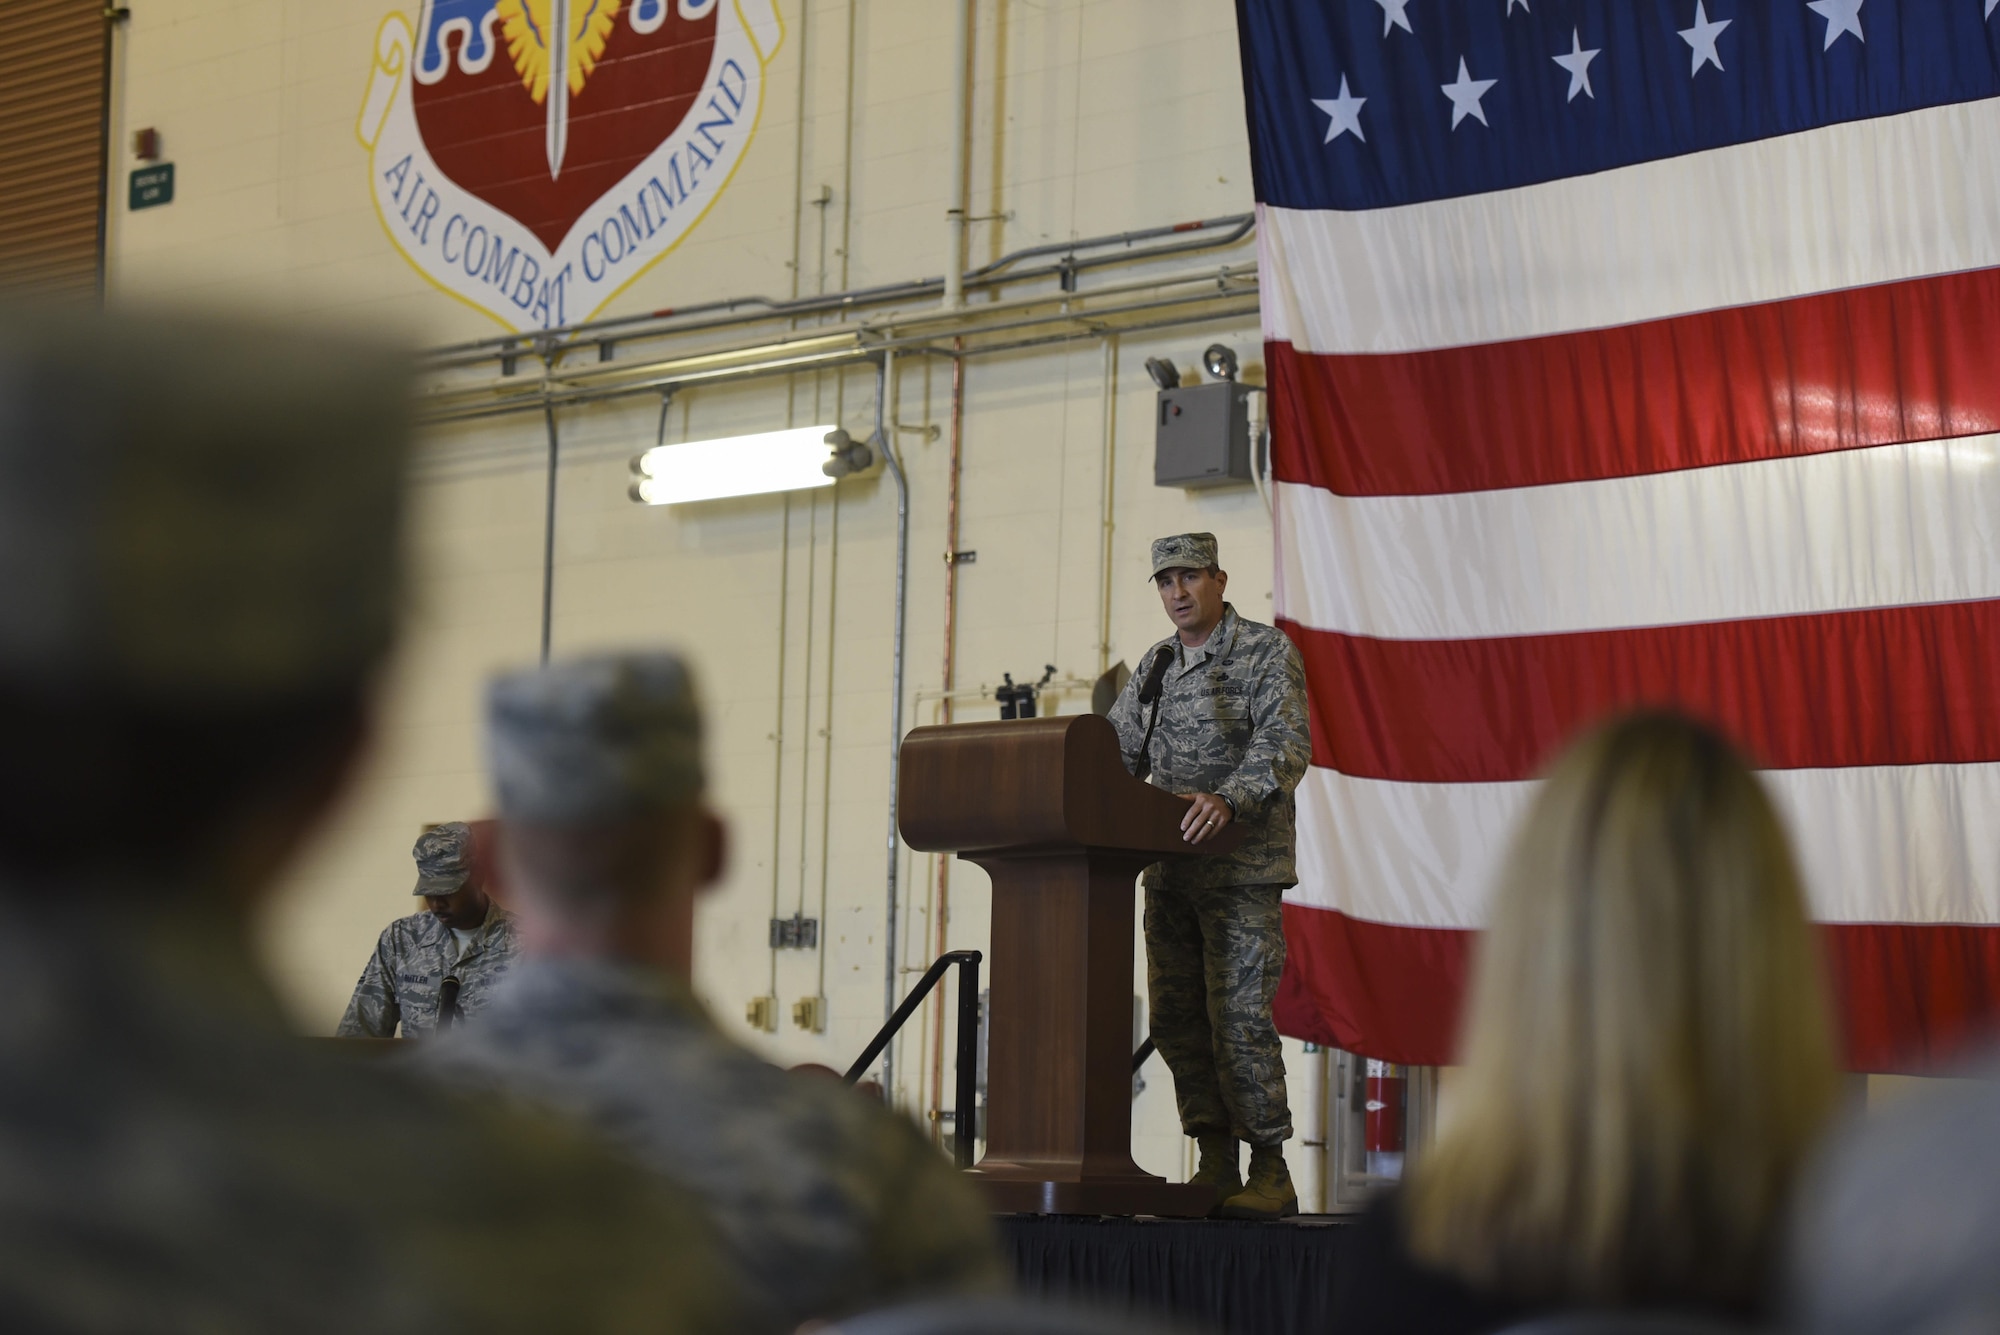 Col. John Chastain III, 23d Maintenance Group commander, praises the accomplishments of the inactive 23d Component and Equipment Maintenance Squadrons during the 23d Maintenance Squadron re-designation ceremony, Nov. 9, 2017, at Moody Air Force Base, Ga. Chastain commended Lt. Col. Neal Van Houten's ability to lead and take command of Air Combat Command’s second largest squadron, guiding the 800 men and women who are responsible for executing safe and reliable maintenance on aircraft systems, ground equipment and munitions to support the 23d Wing's attack and rescue missions. (U.S. Air Force photo by Senior Airman Greg Nash)